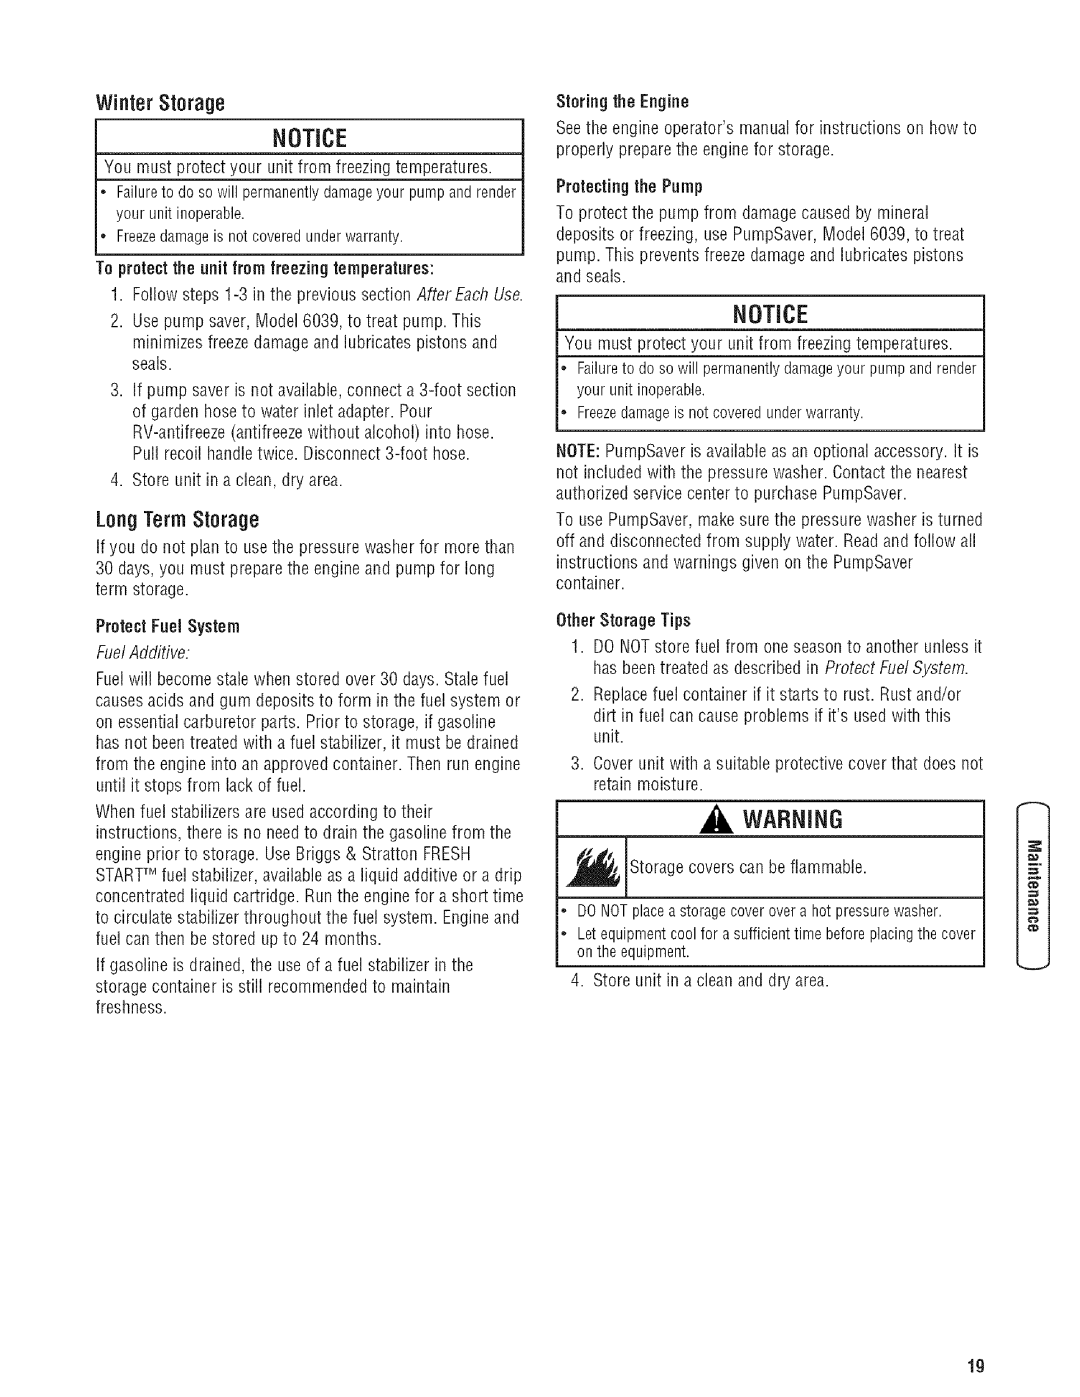 Troy-Bilt 203779GS manual Winter Storage, LongTermStorage, Notice, To protectthe unit from freezing temperatures 